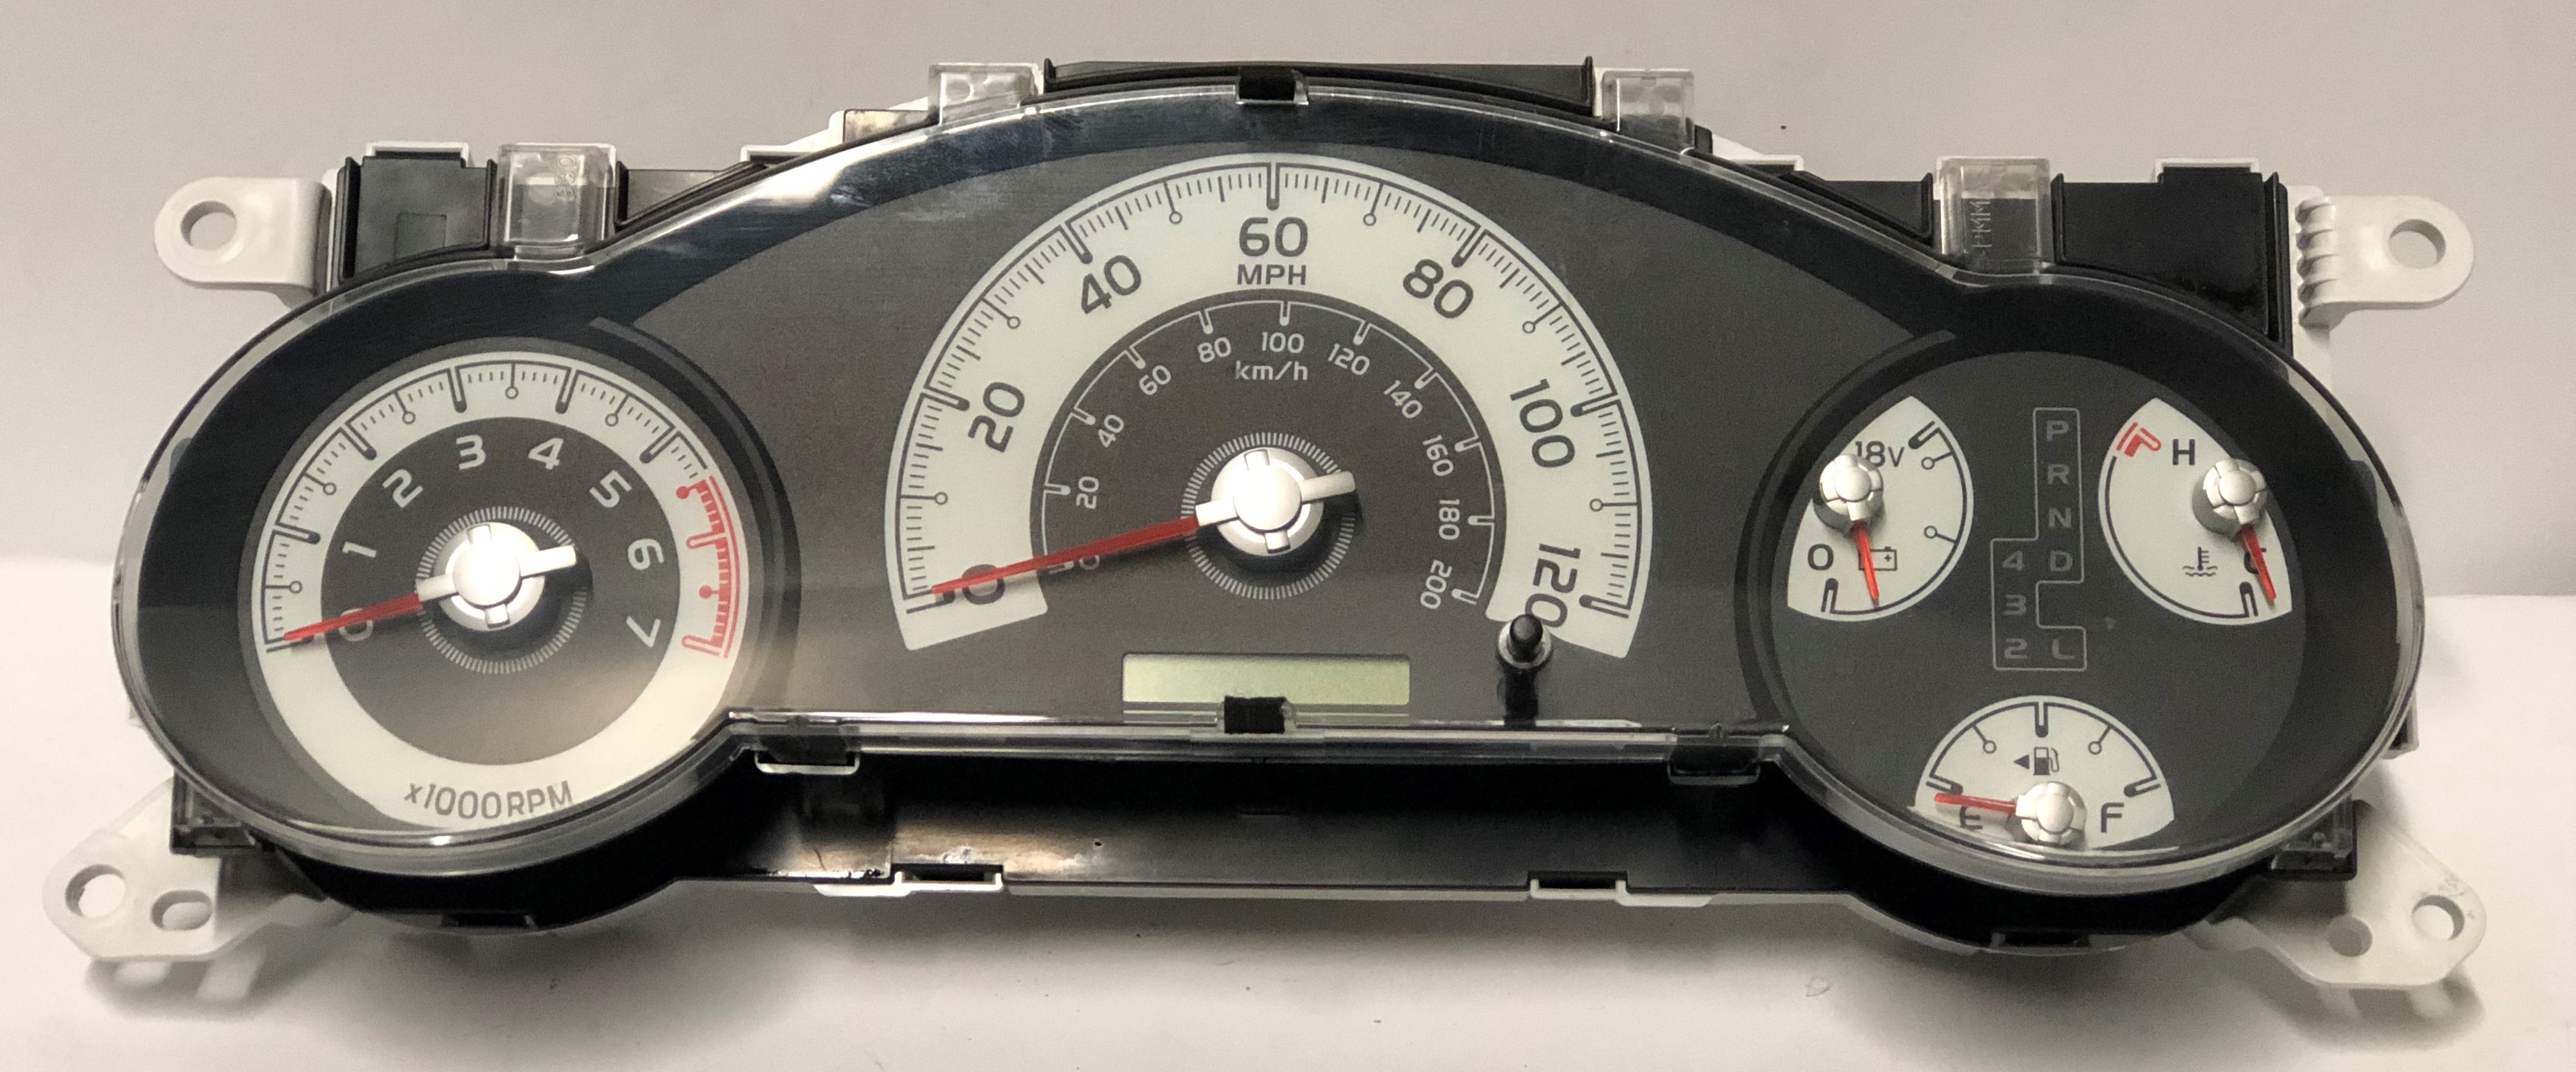 2007 2008 Toyota Fj Cruiser Used Dashboard Instrument Cluster For